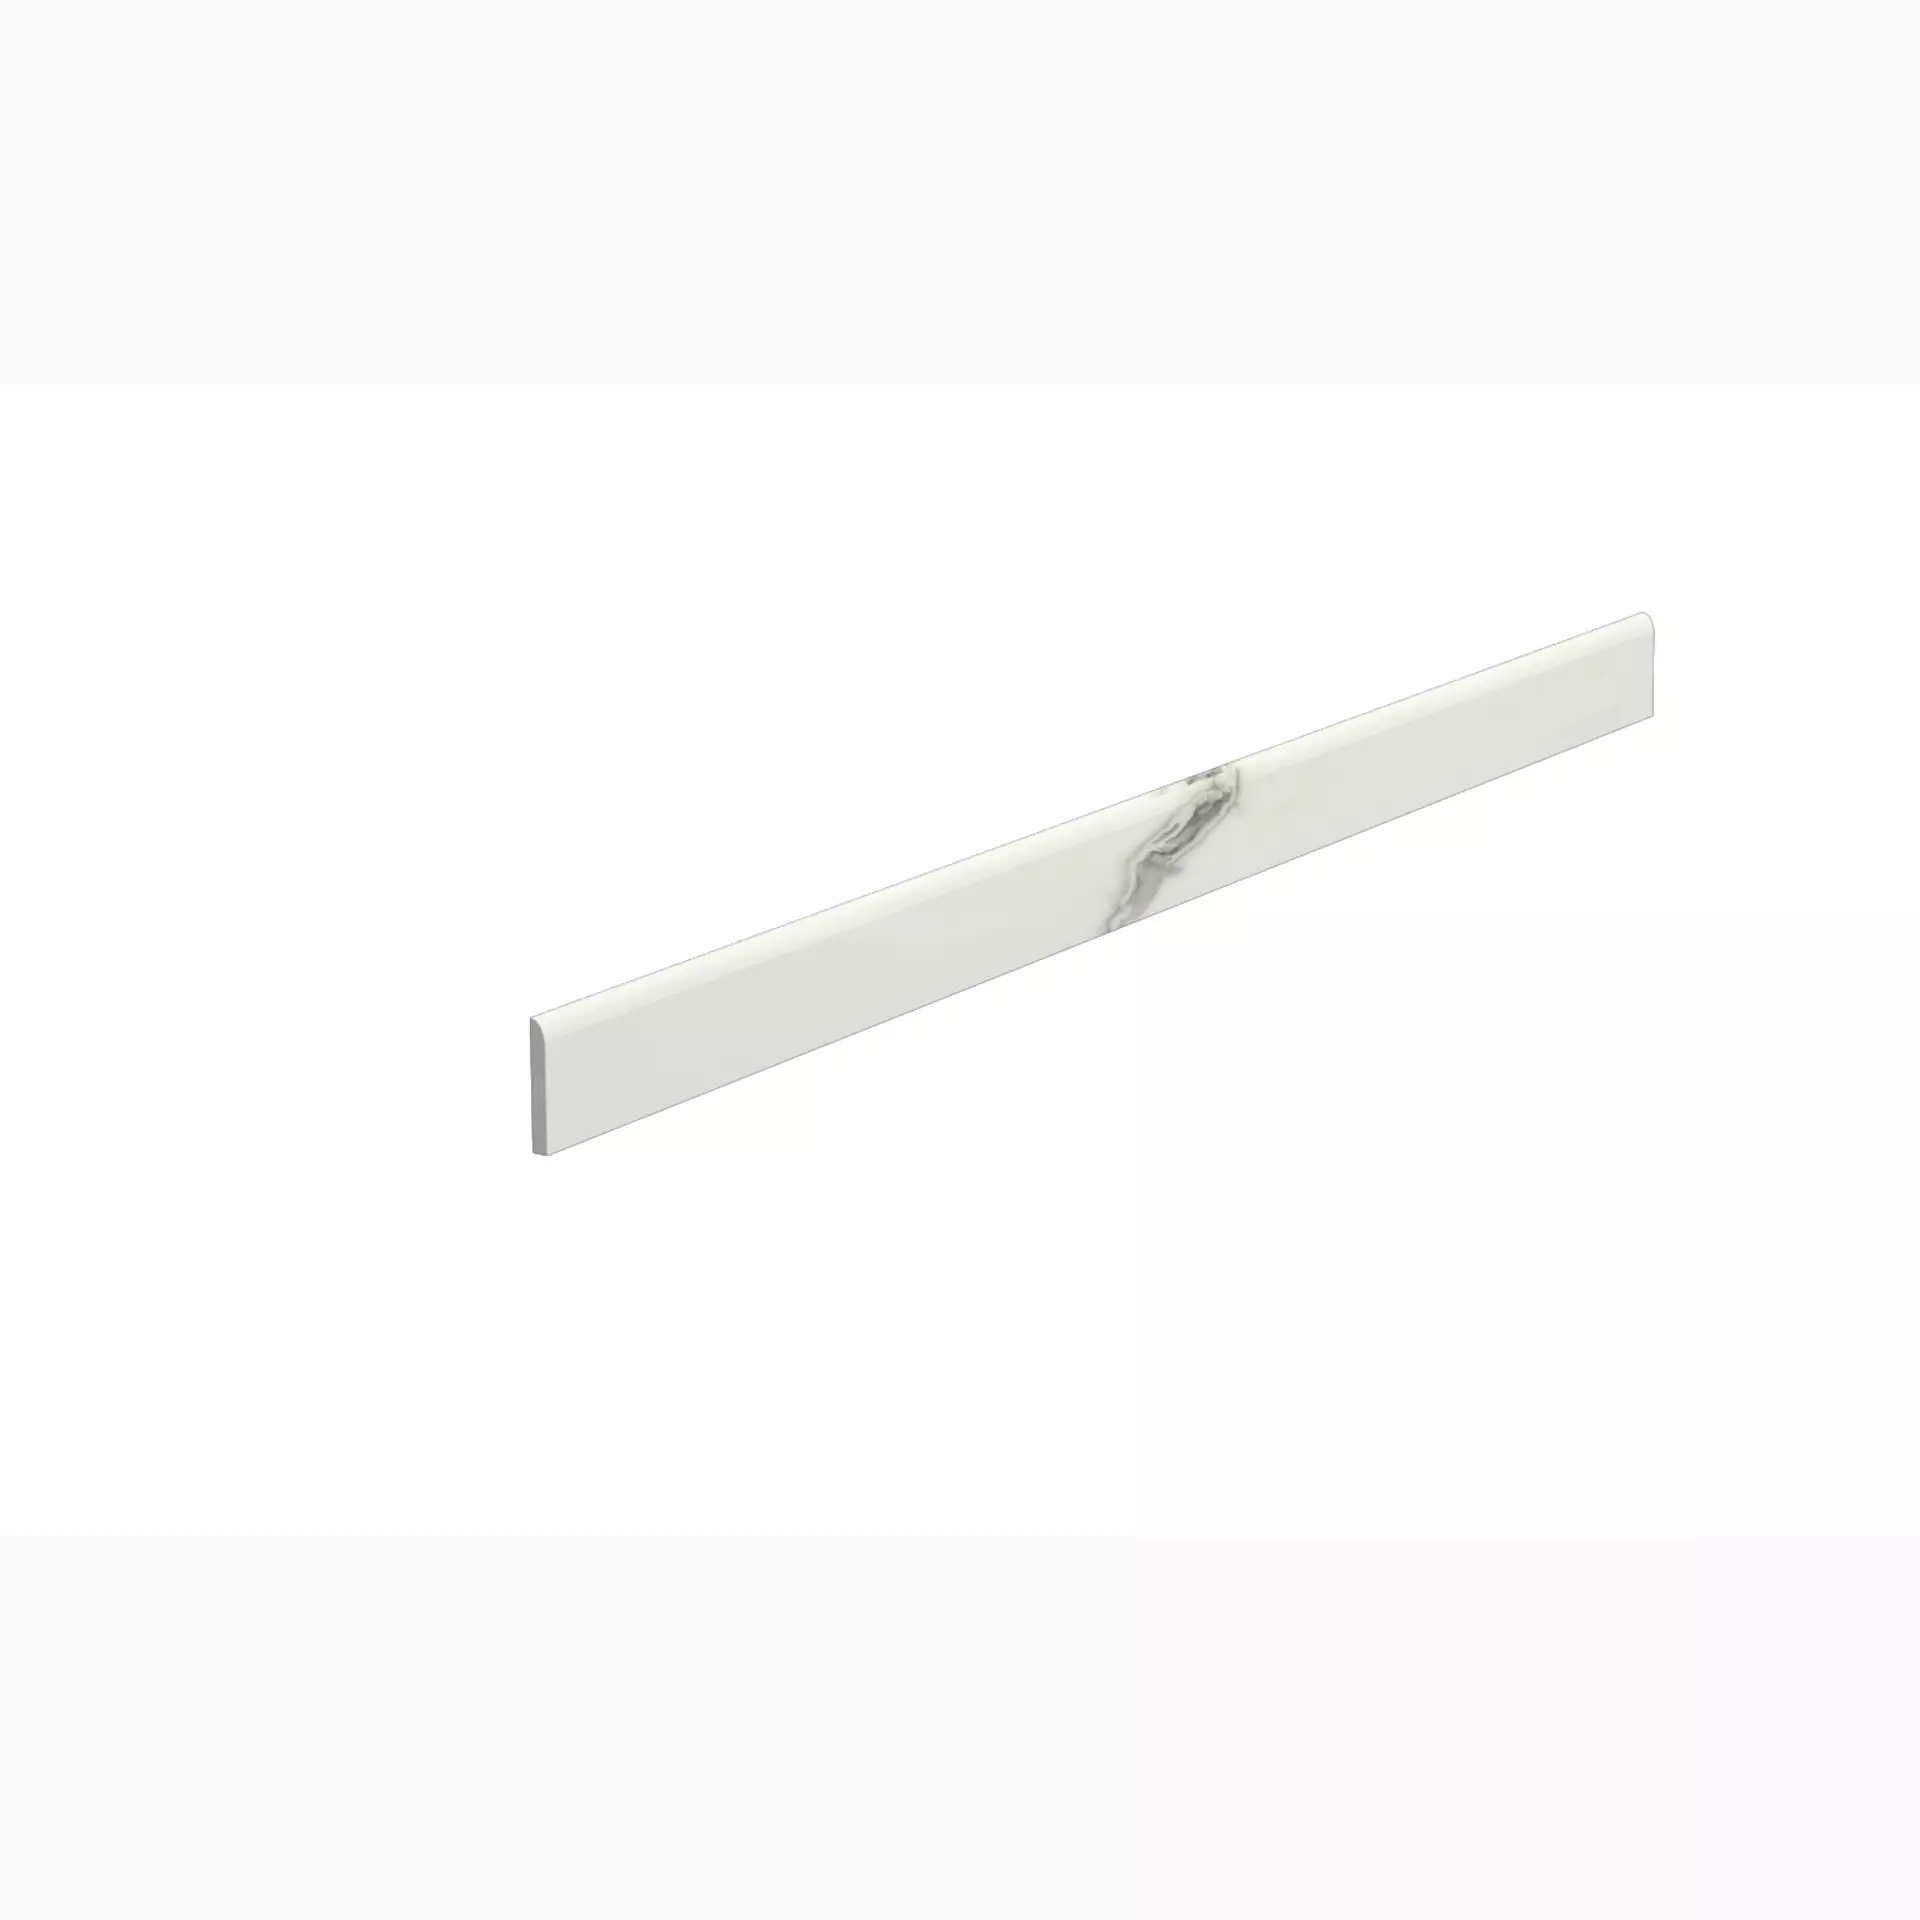 Del Conca Hpm Premiere Onice Bianco Hpm Naturale Skirting board G0PM20R12 7x120cm rectified 8,5mm